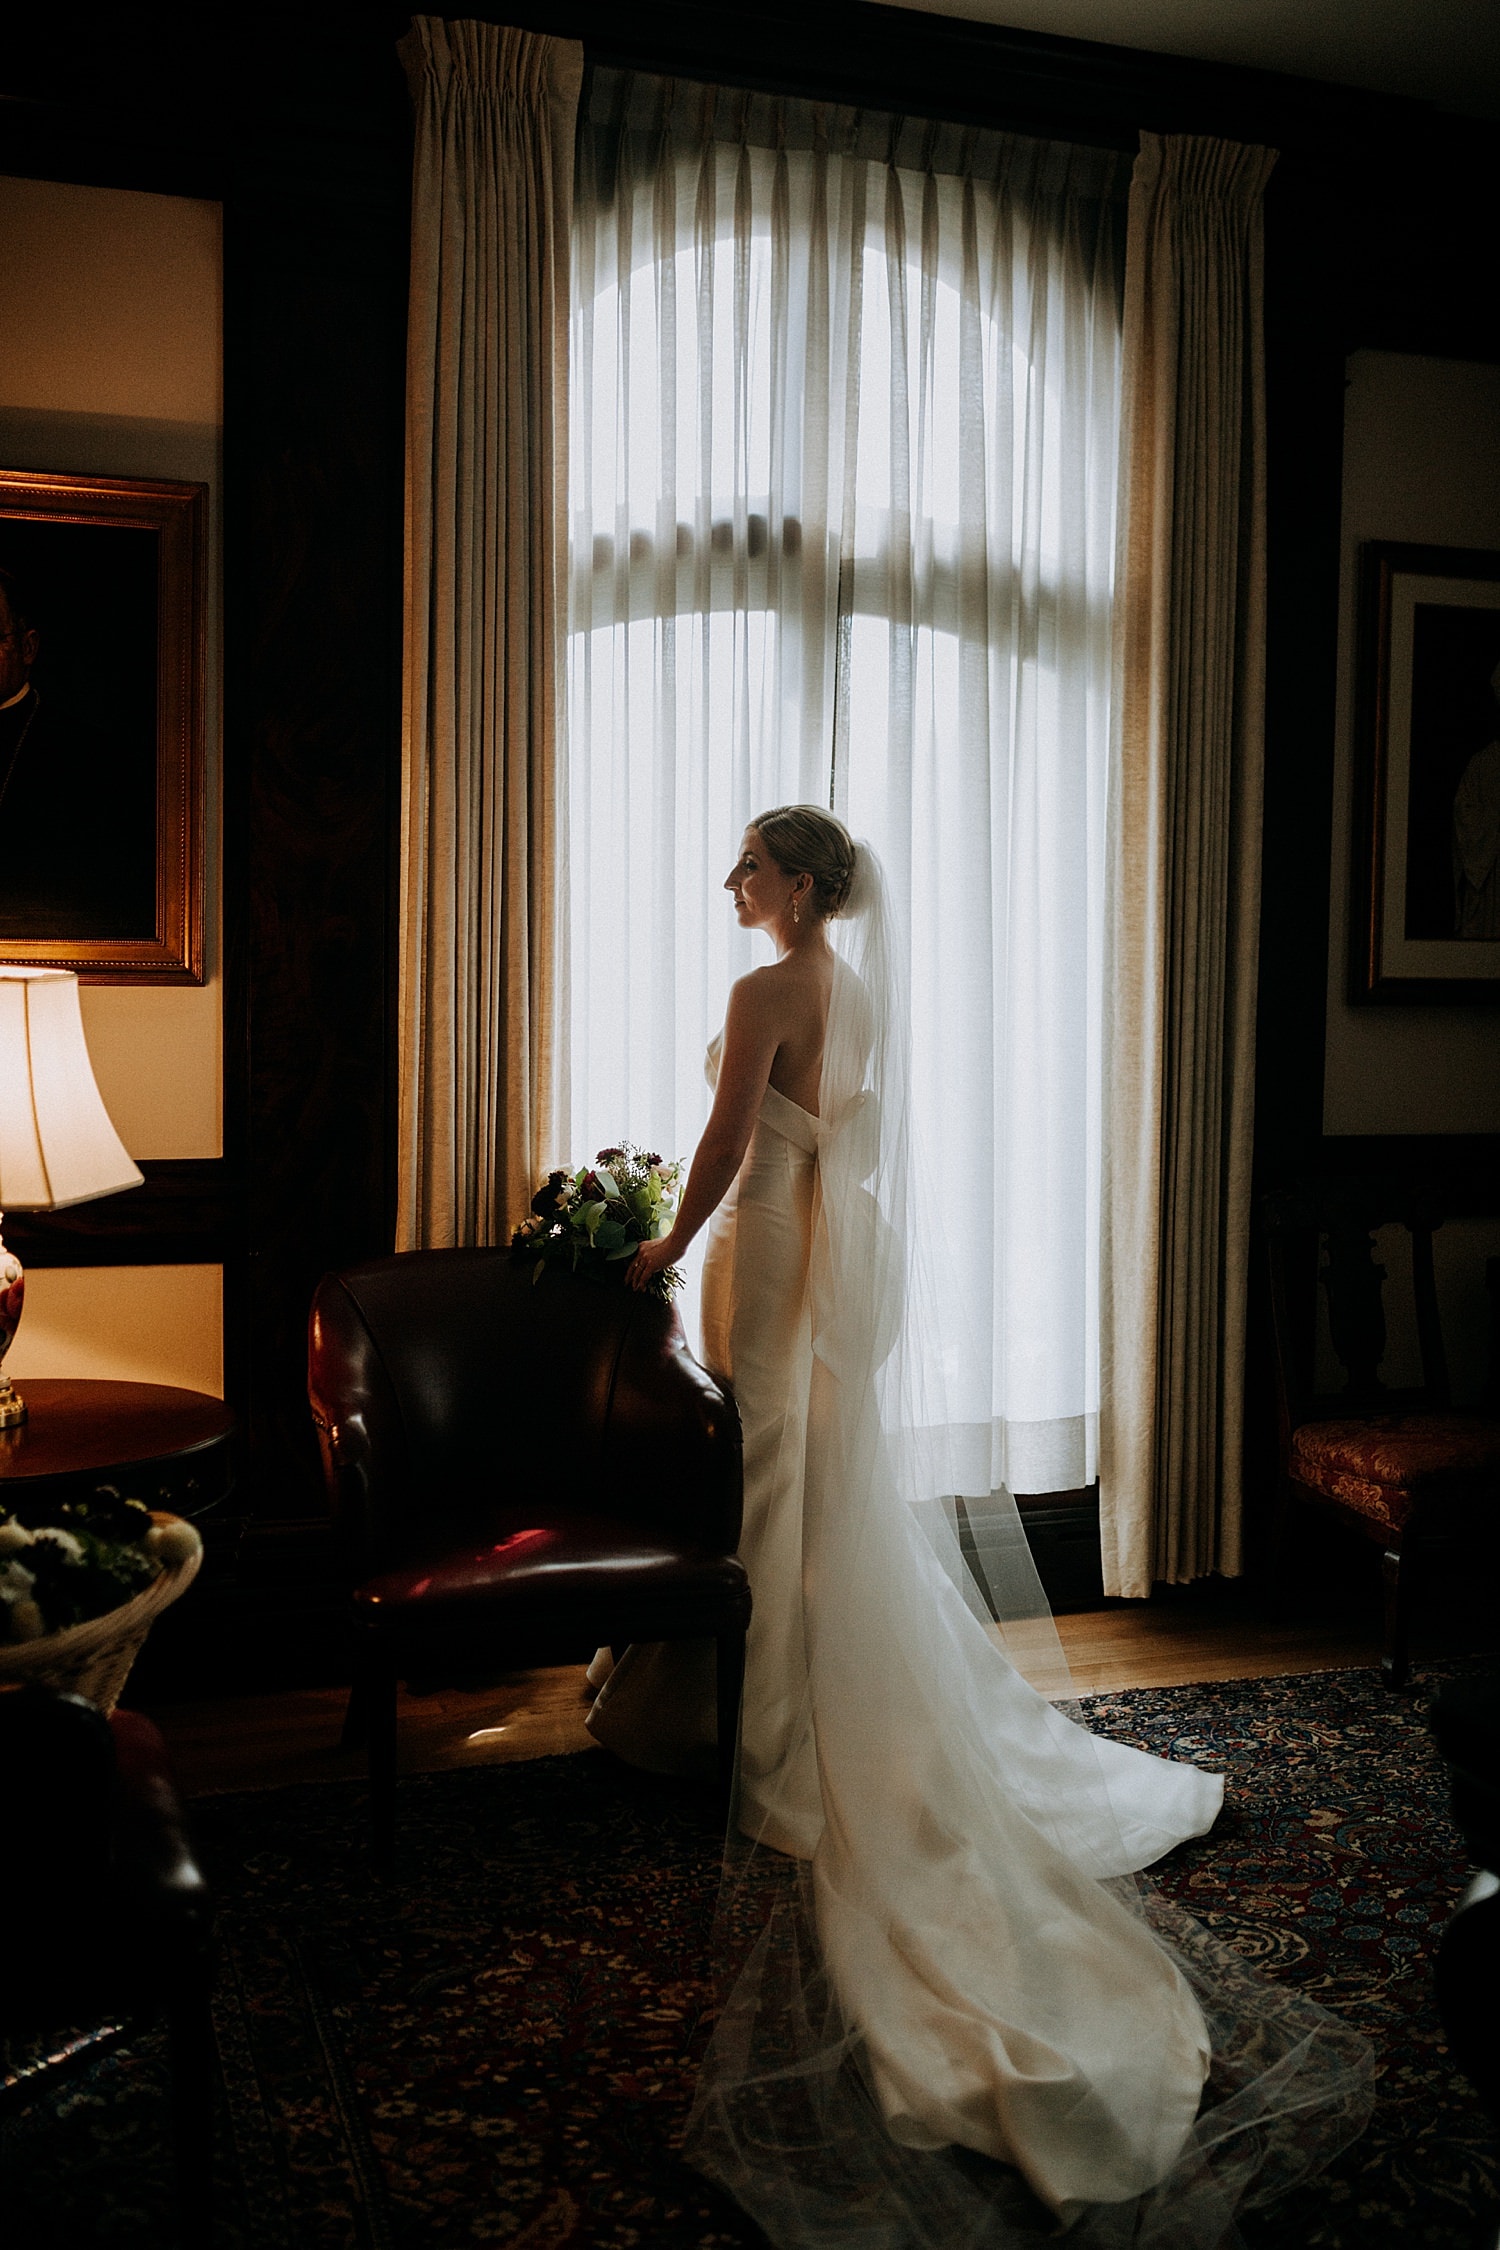 stunning dark and moody portrait of the bride standing in front of a window at St James Cathedral 415 Westlake Wedding by Marcela Pulido Seattle Wedding Photography